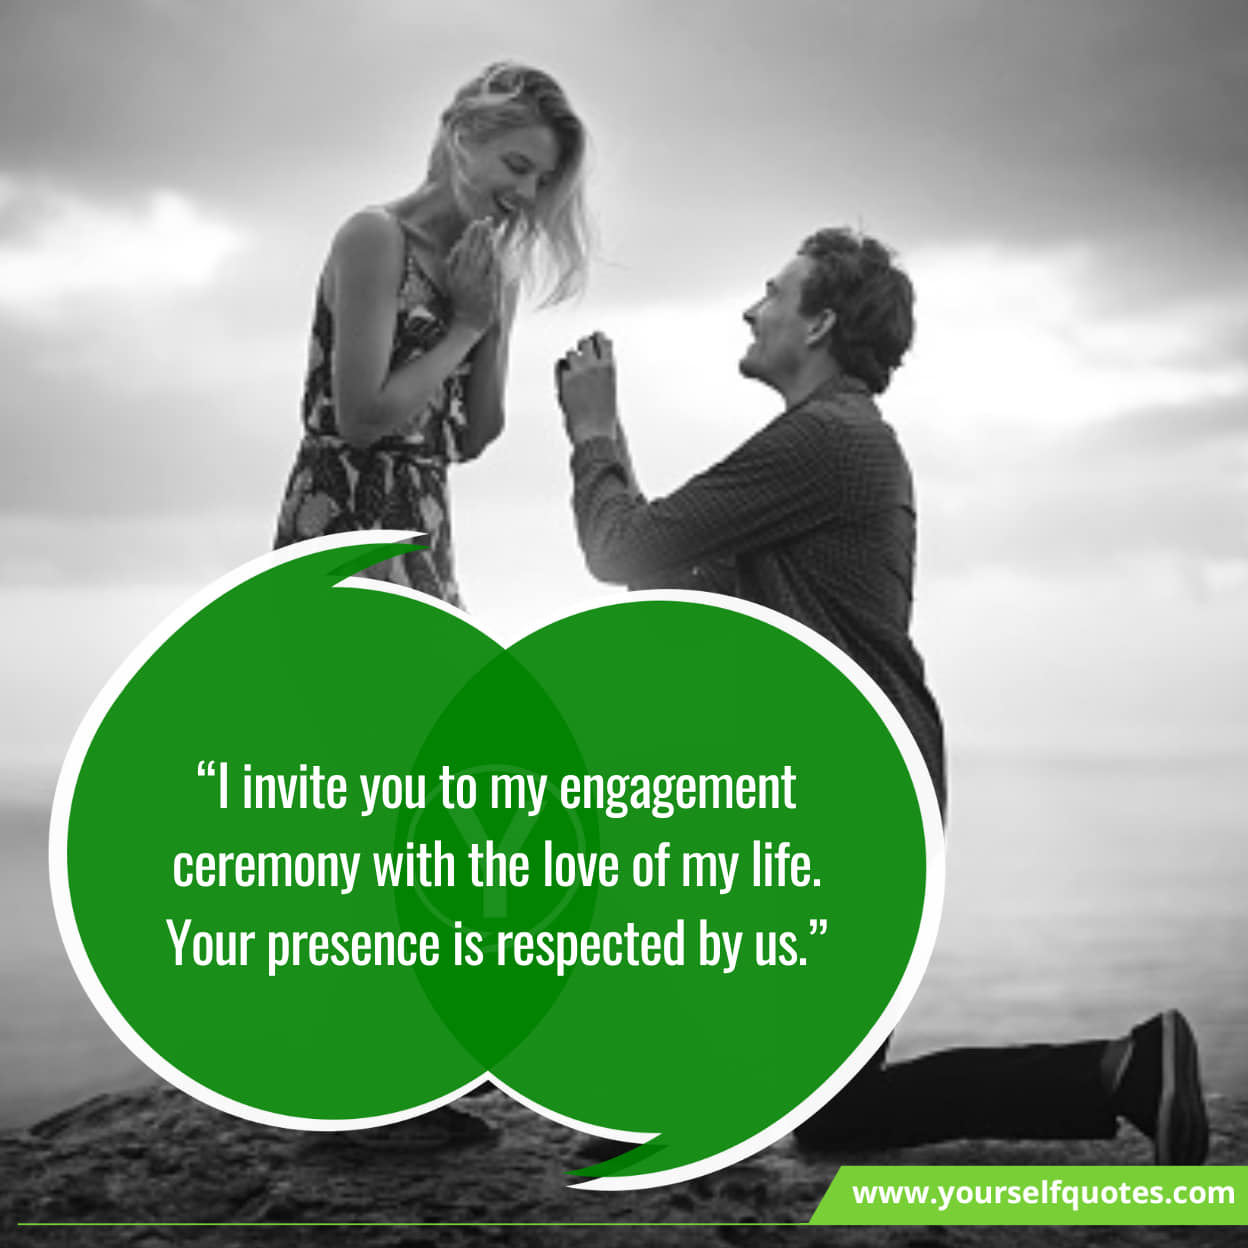 Engagement Invitation Messages To Send